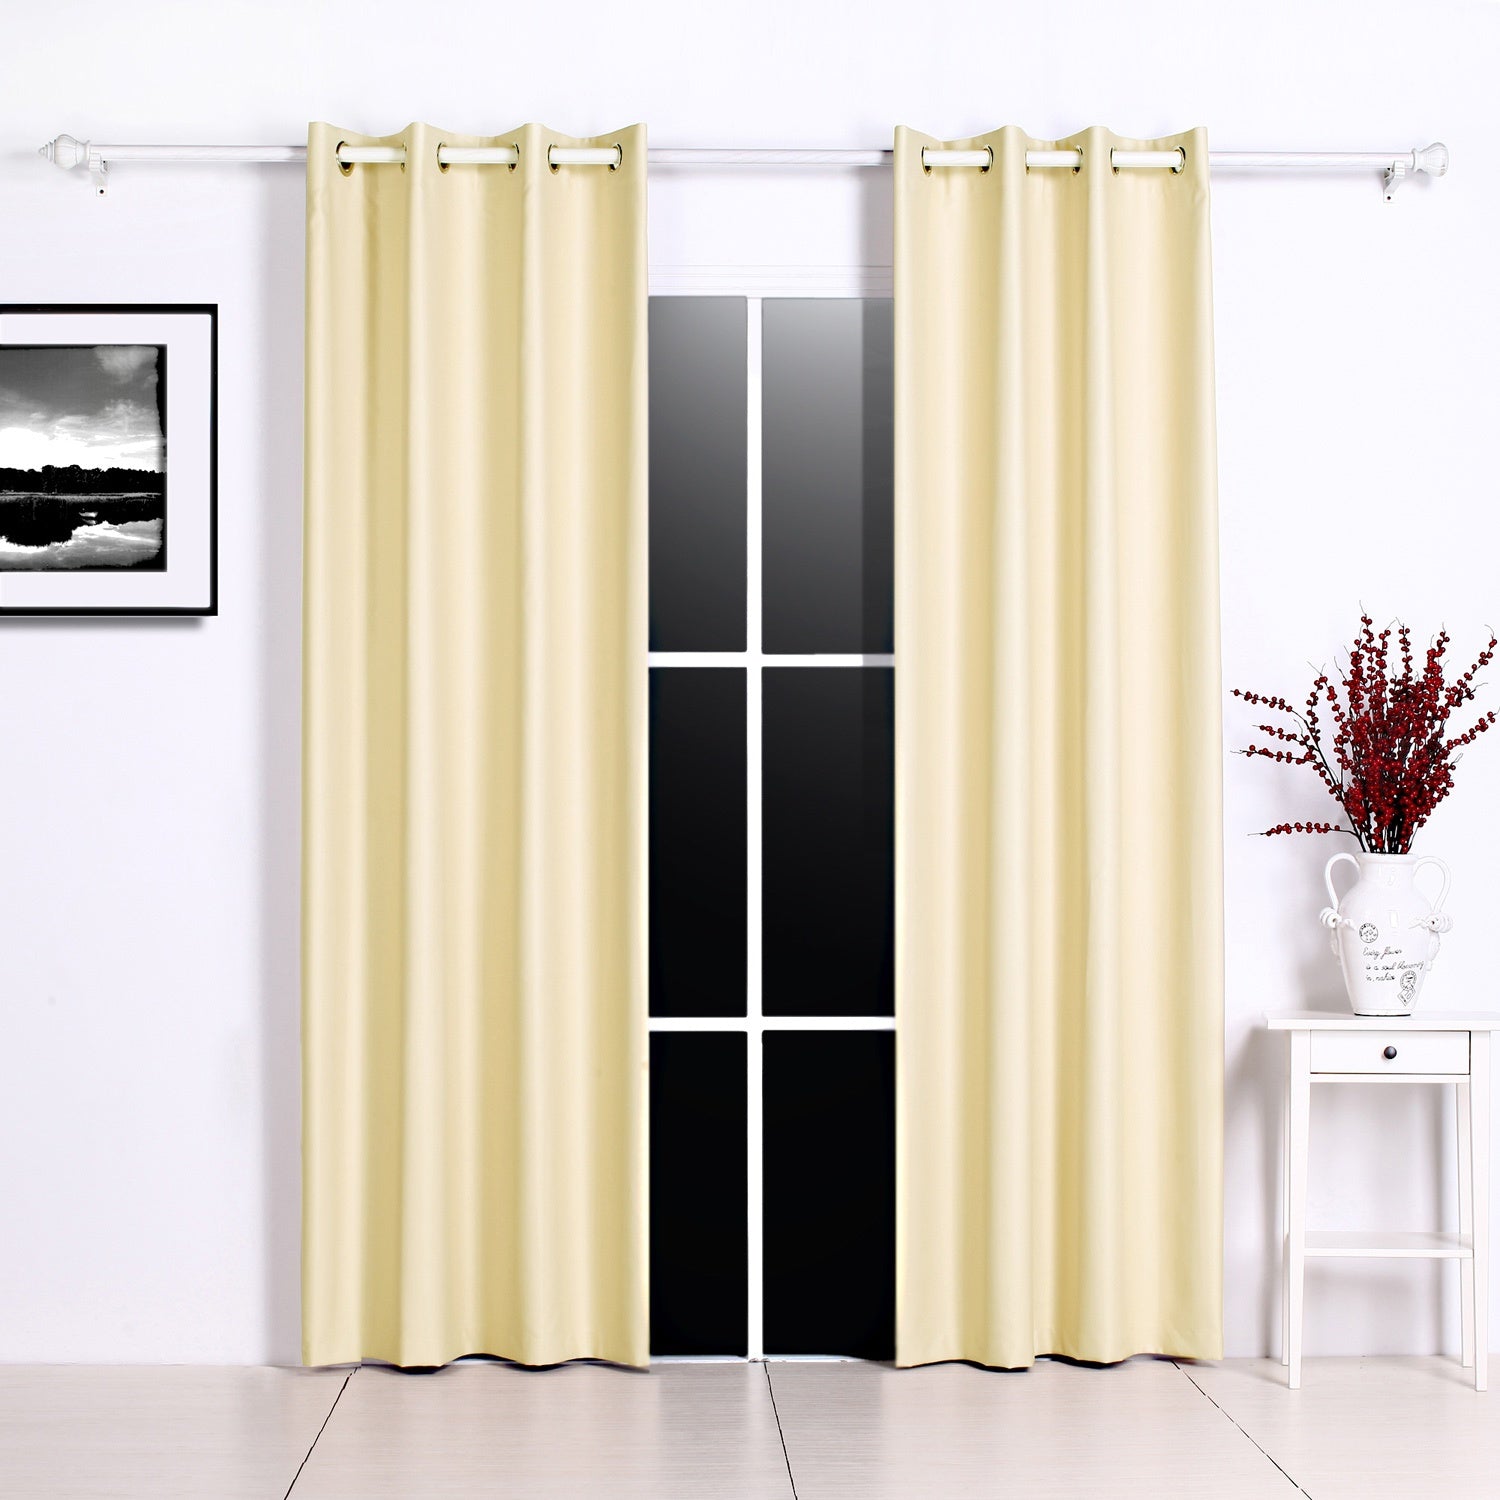 Classical Waffle Embossed Top Silver Grommets Blackout Curtain Set of 1 Window Panel GYC2185